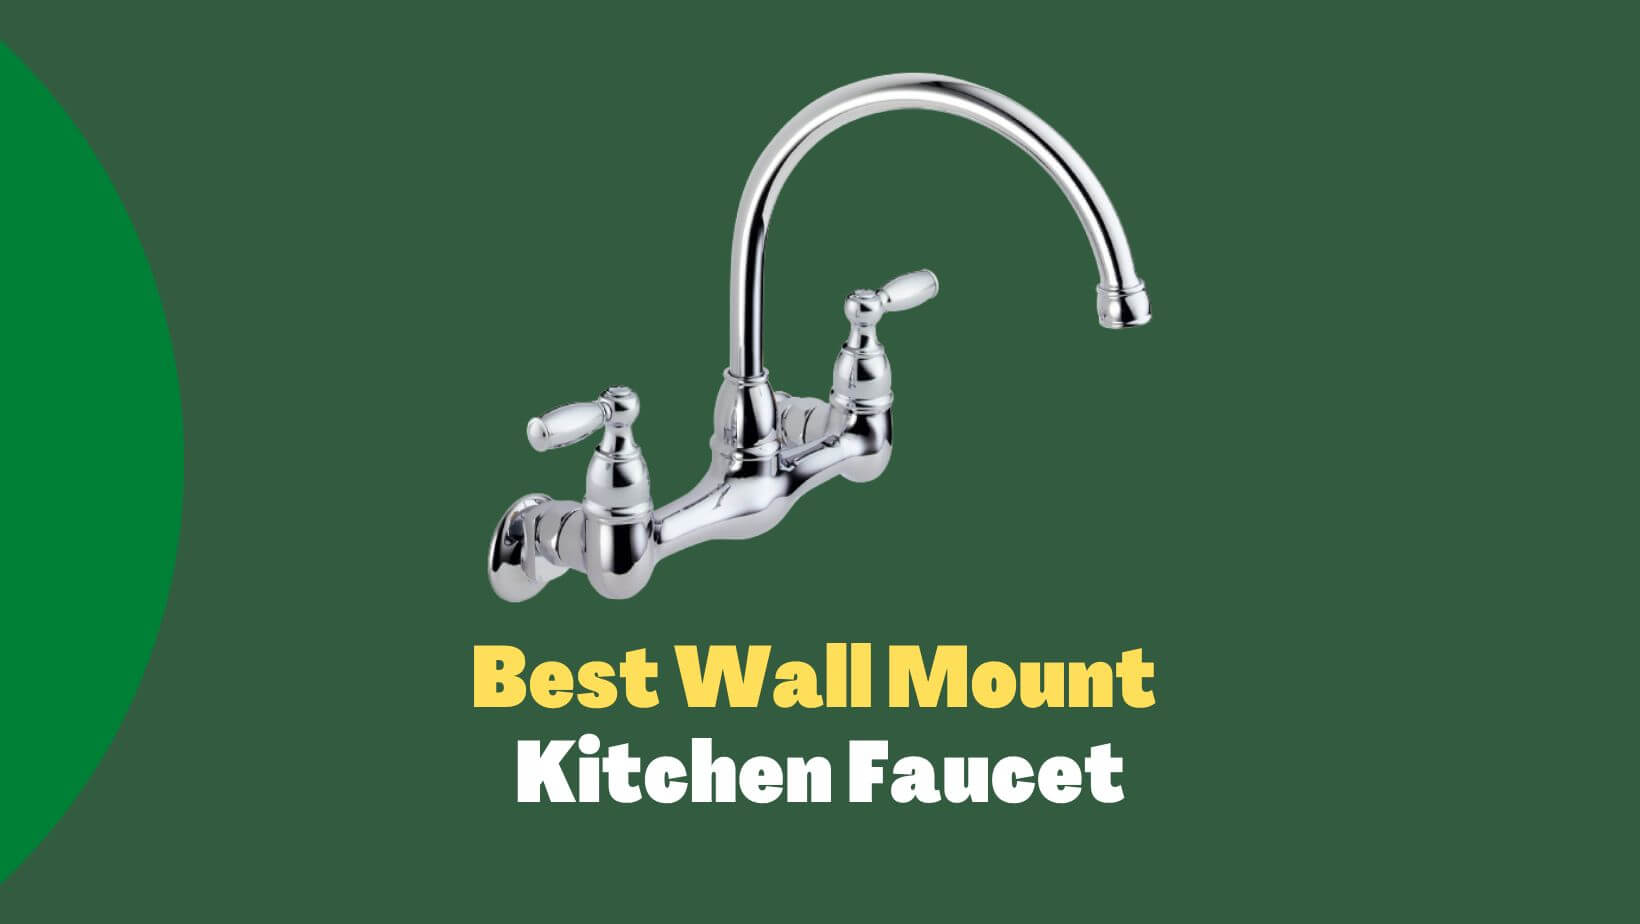 similar to delta 200 wall mount kitchen faucet